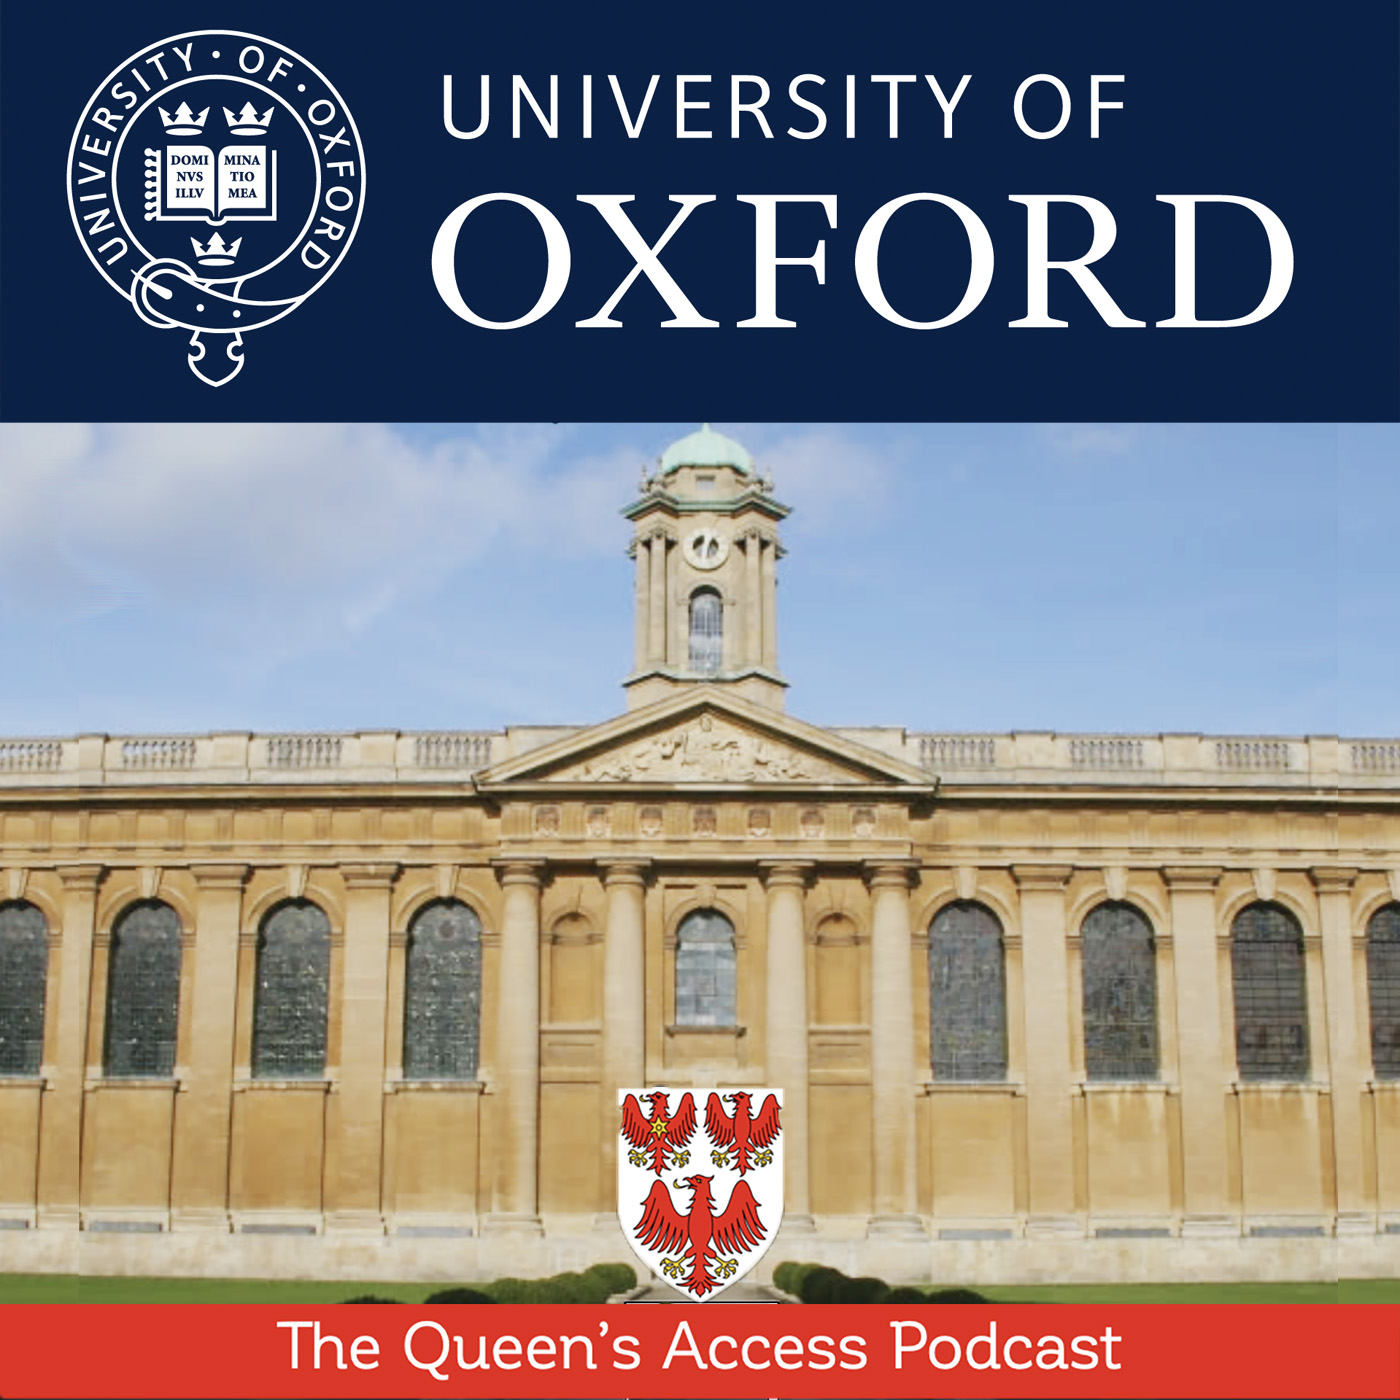 The Queen's Access Podcast